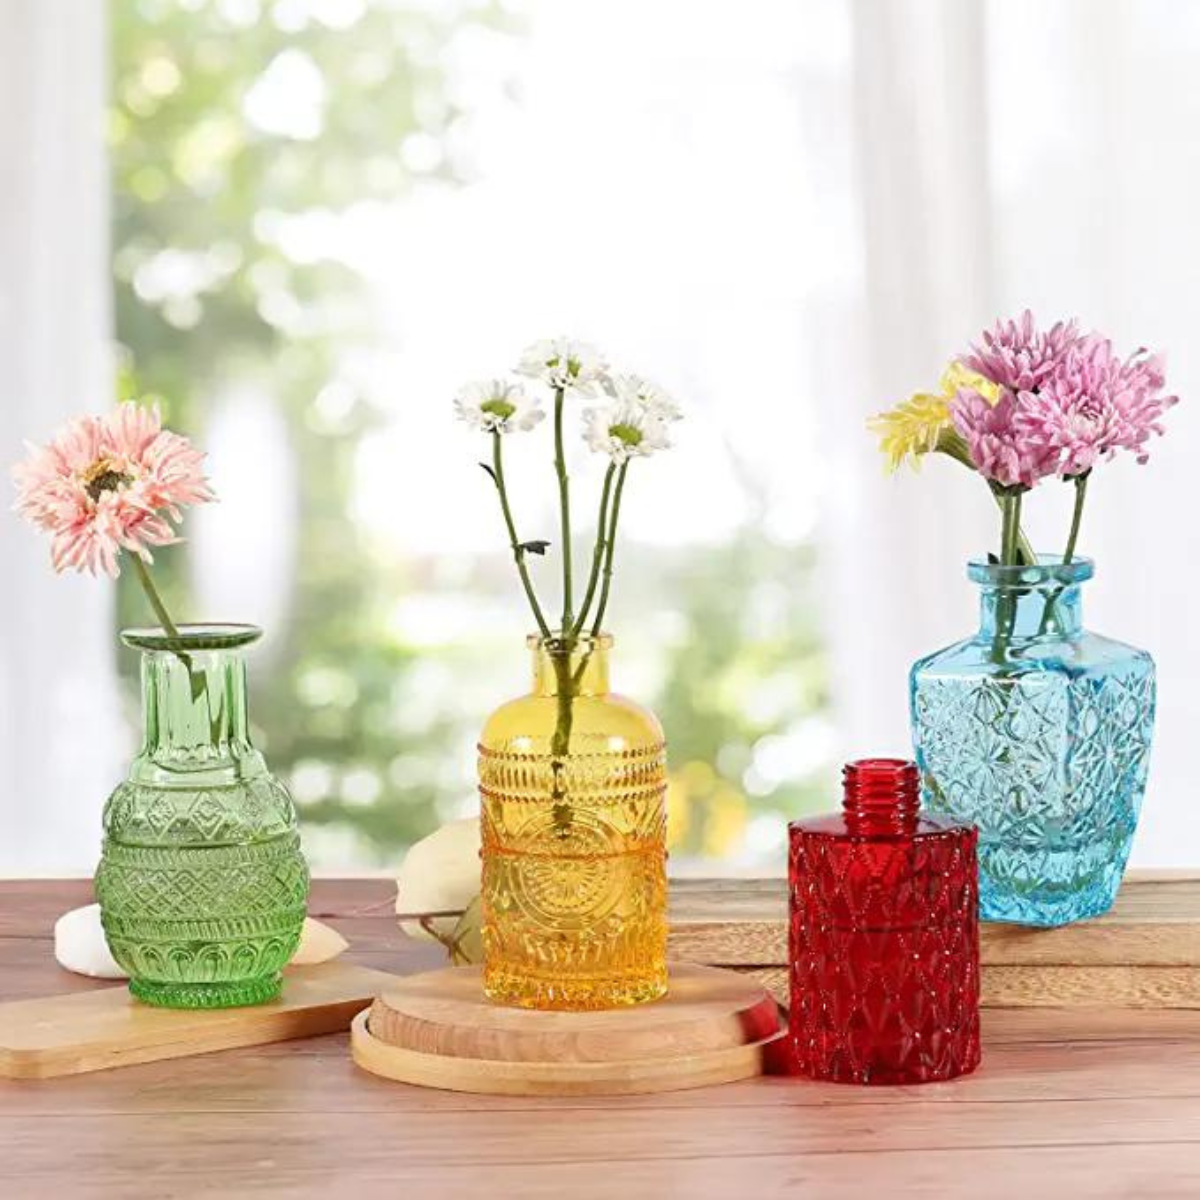 Your Tablescaping Skills Will Be The Envy Of All Your Friends With These 35 Trendy Items